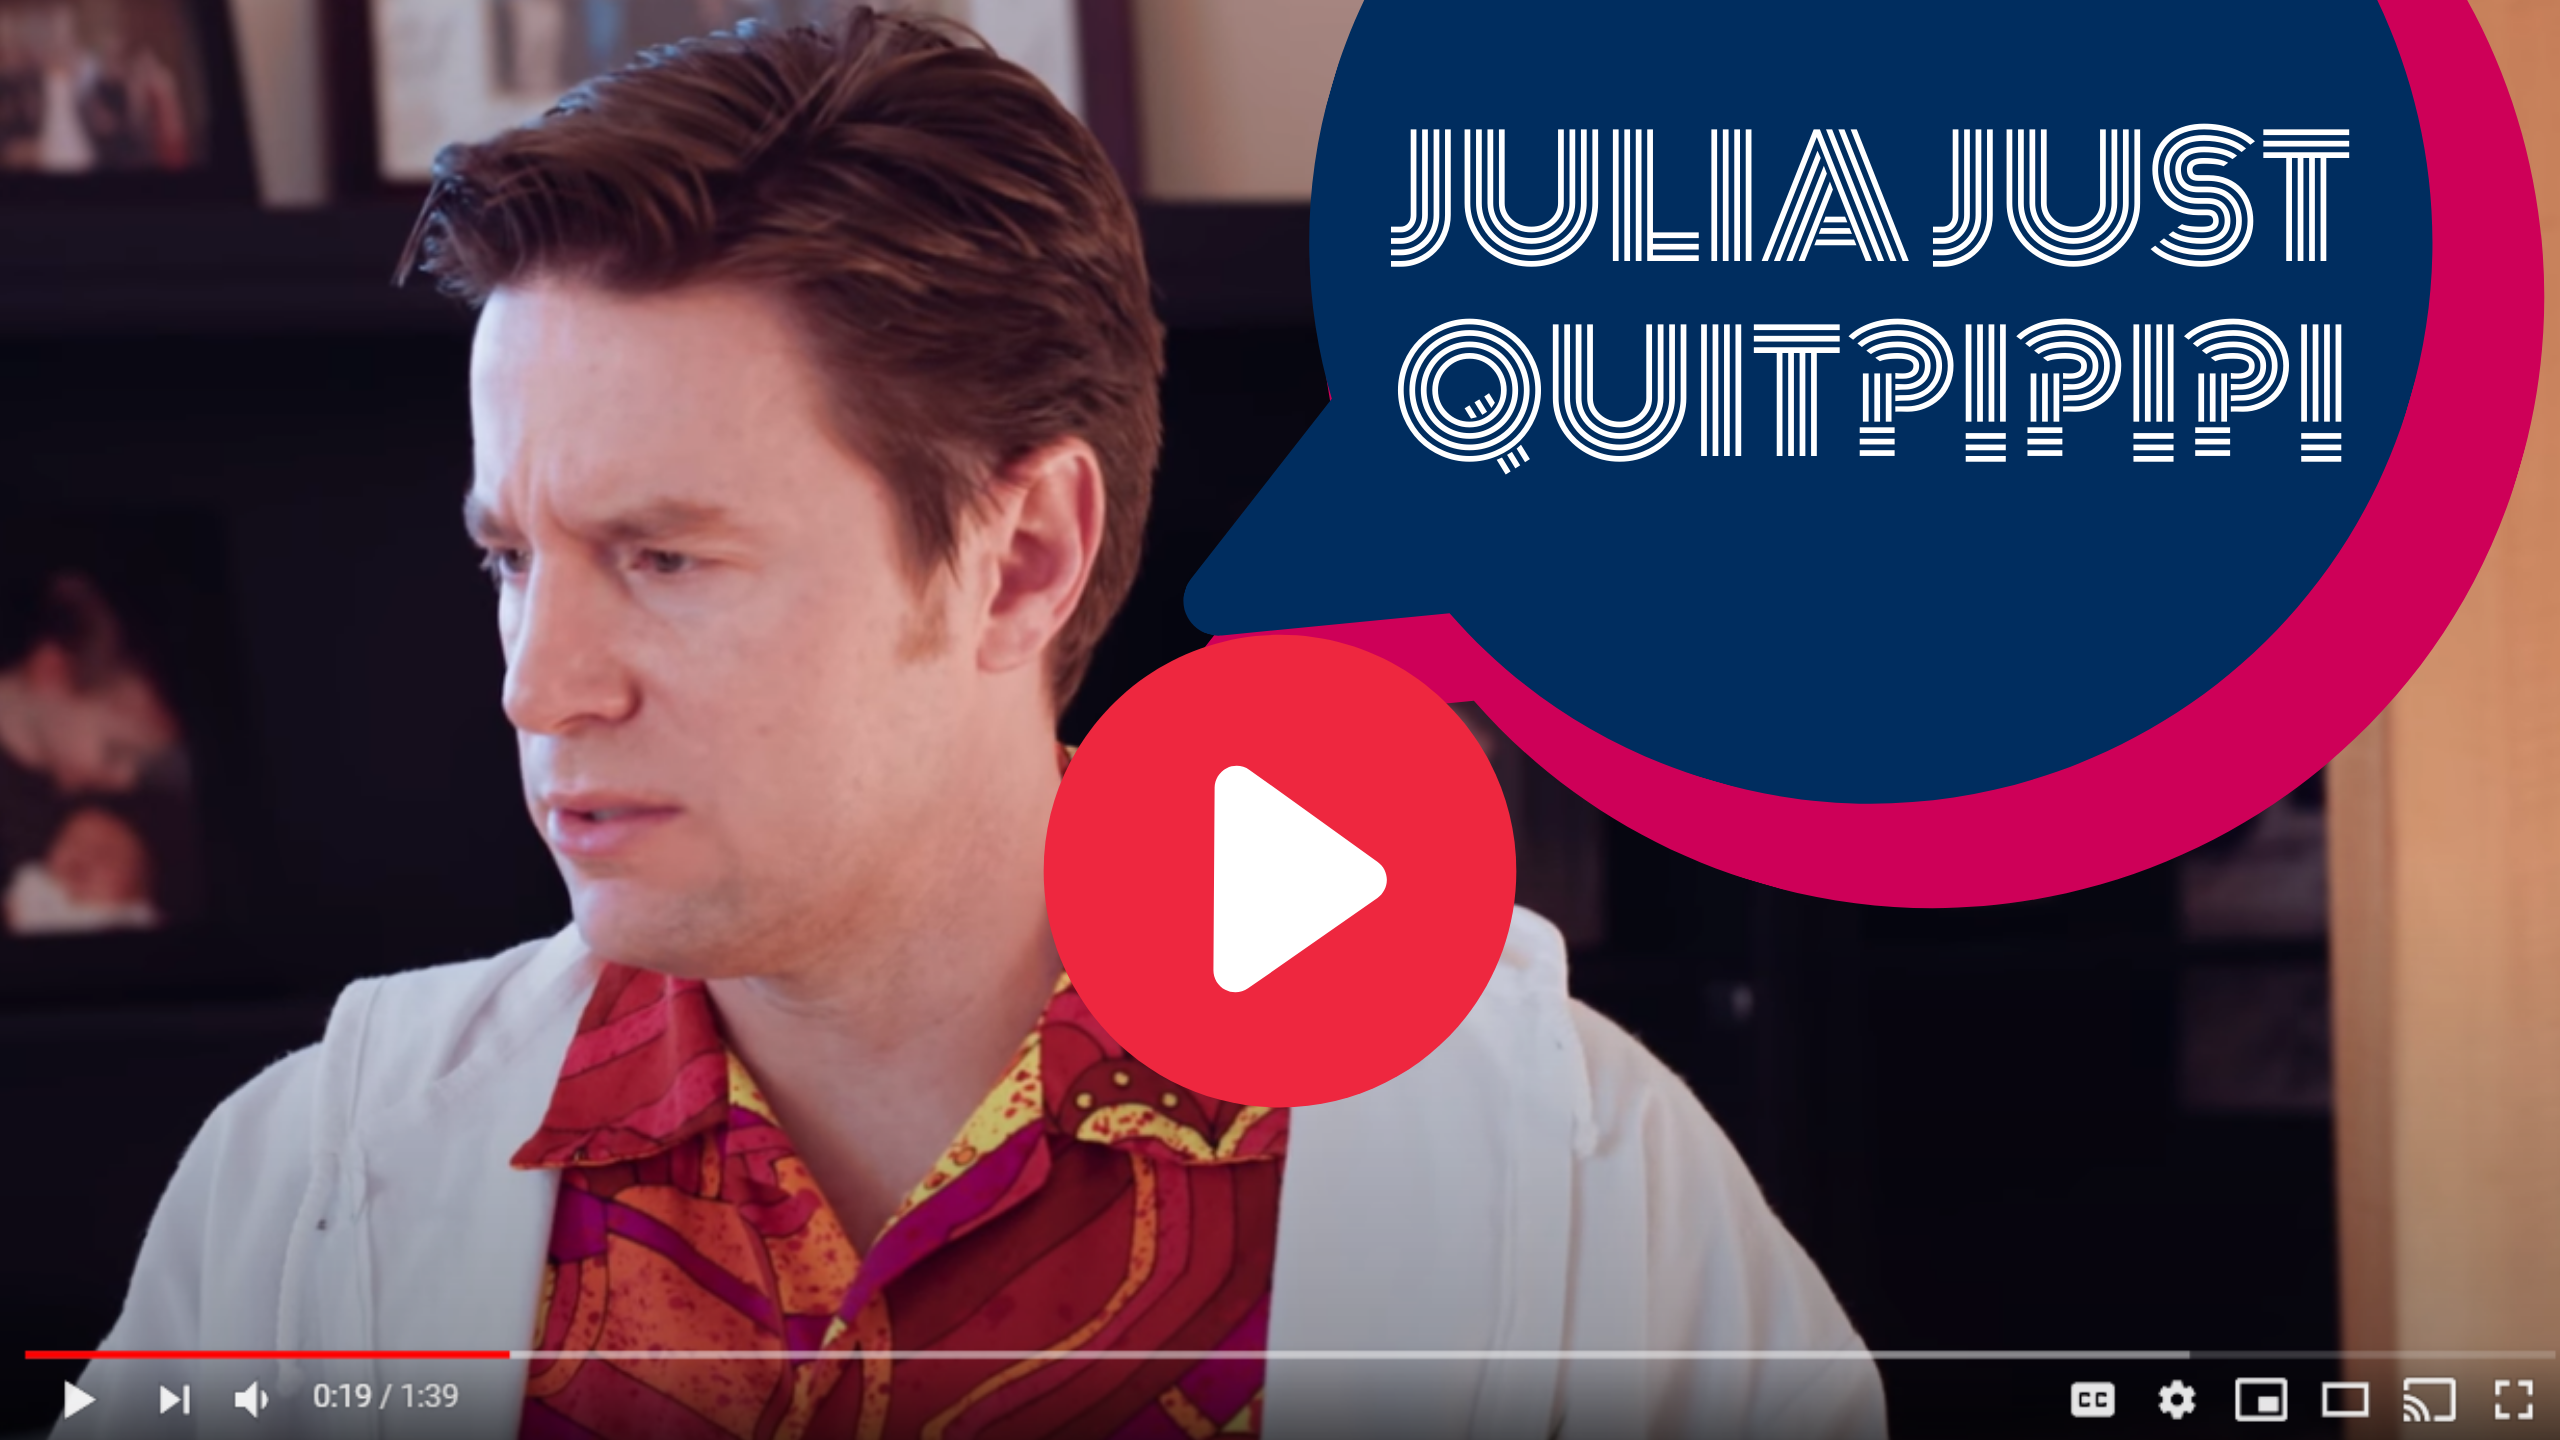 screenshot from Call Willory: Payroll with speech bubble with "Julia just quit?!?!?"